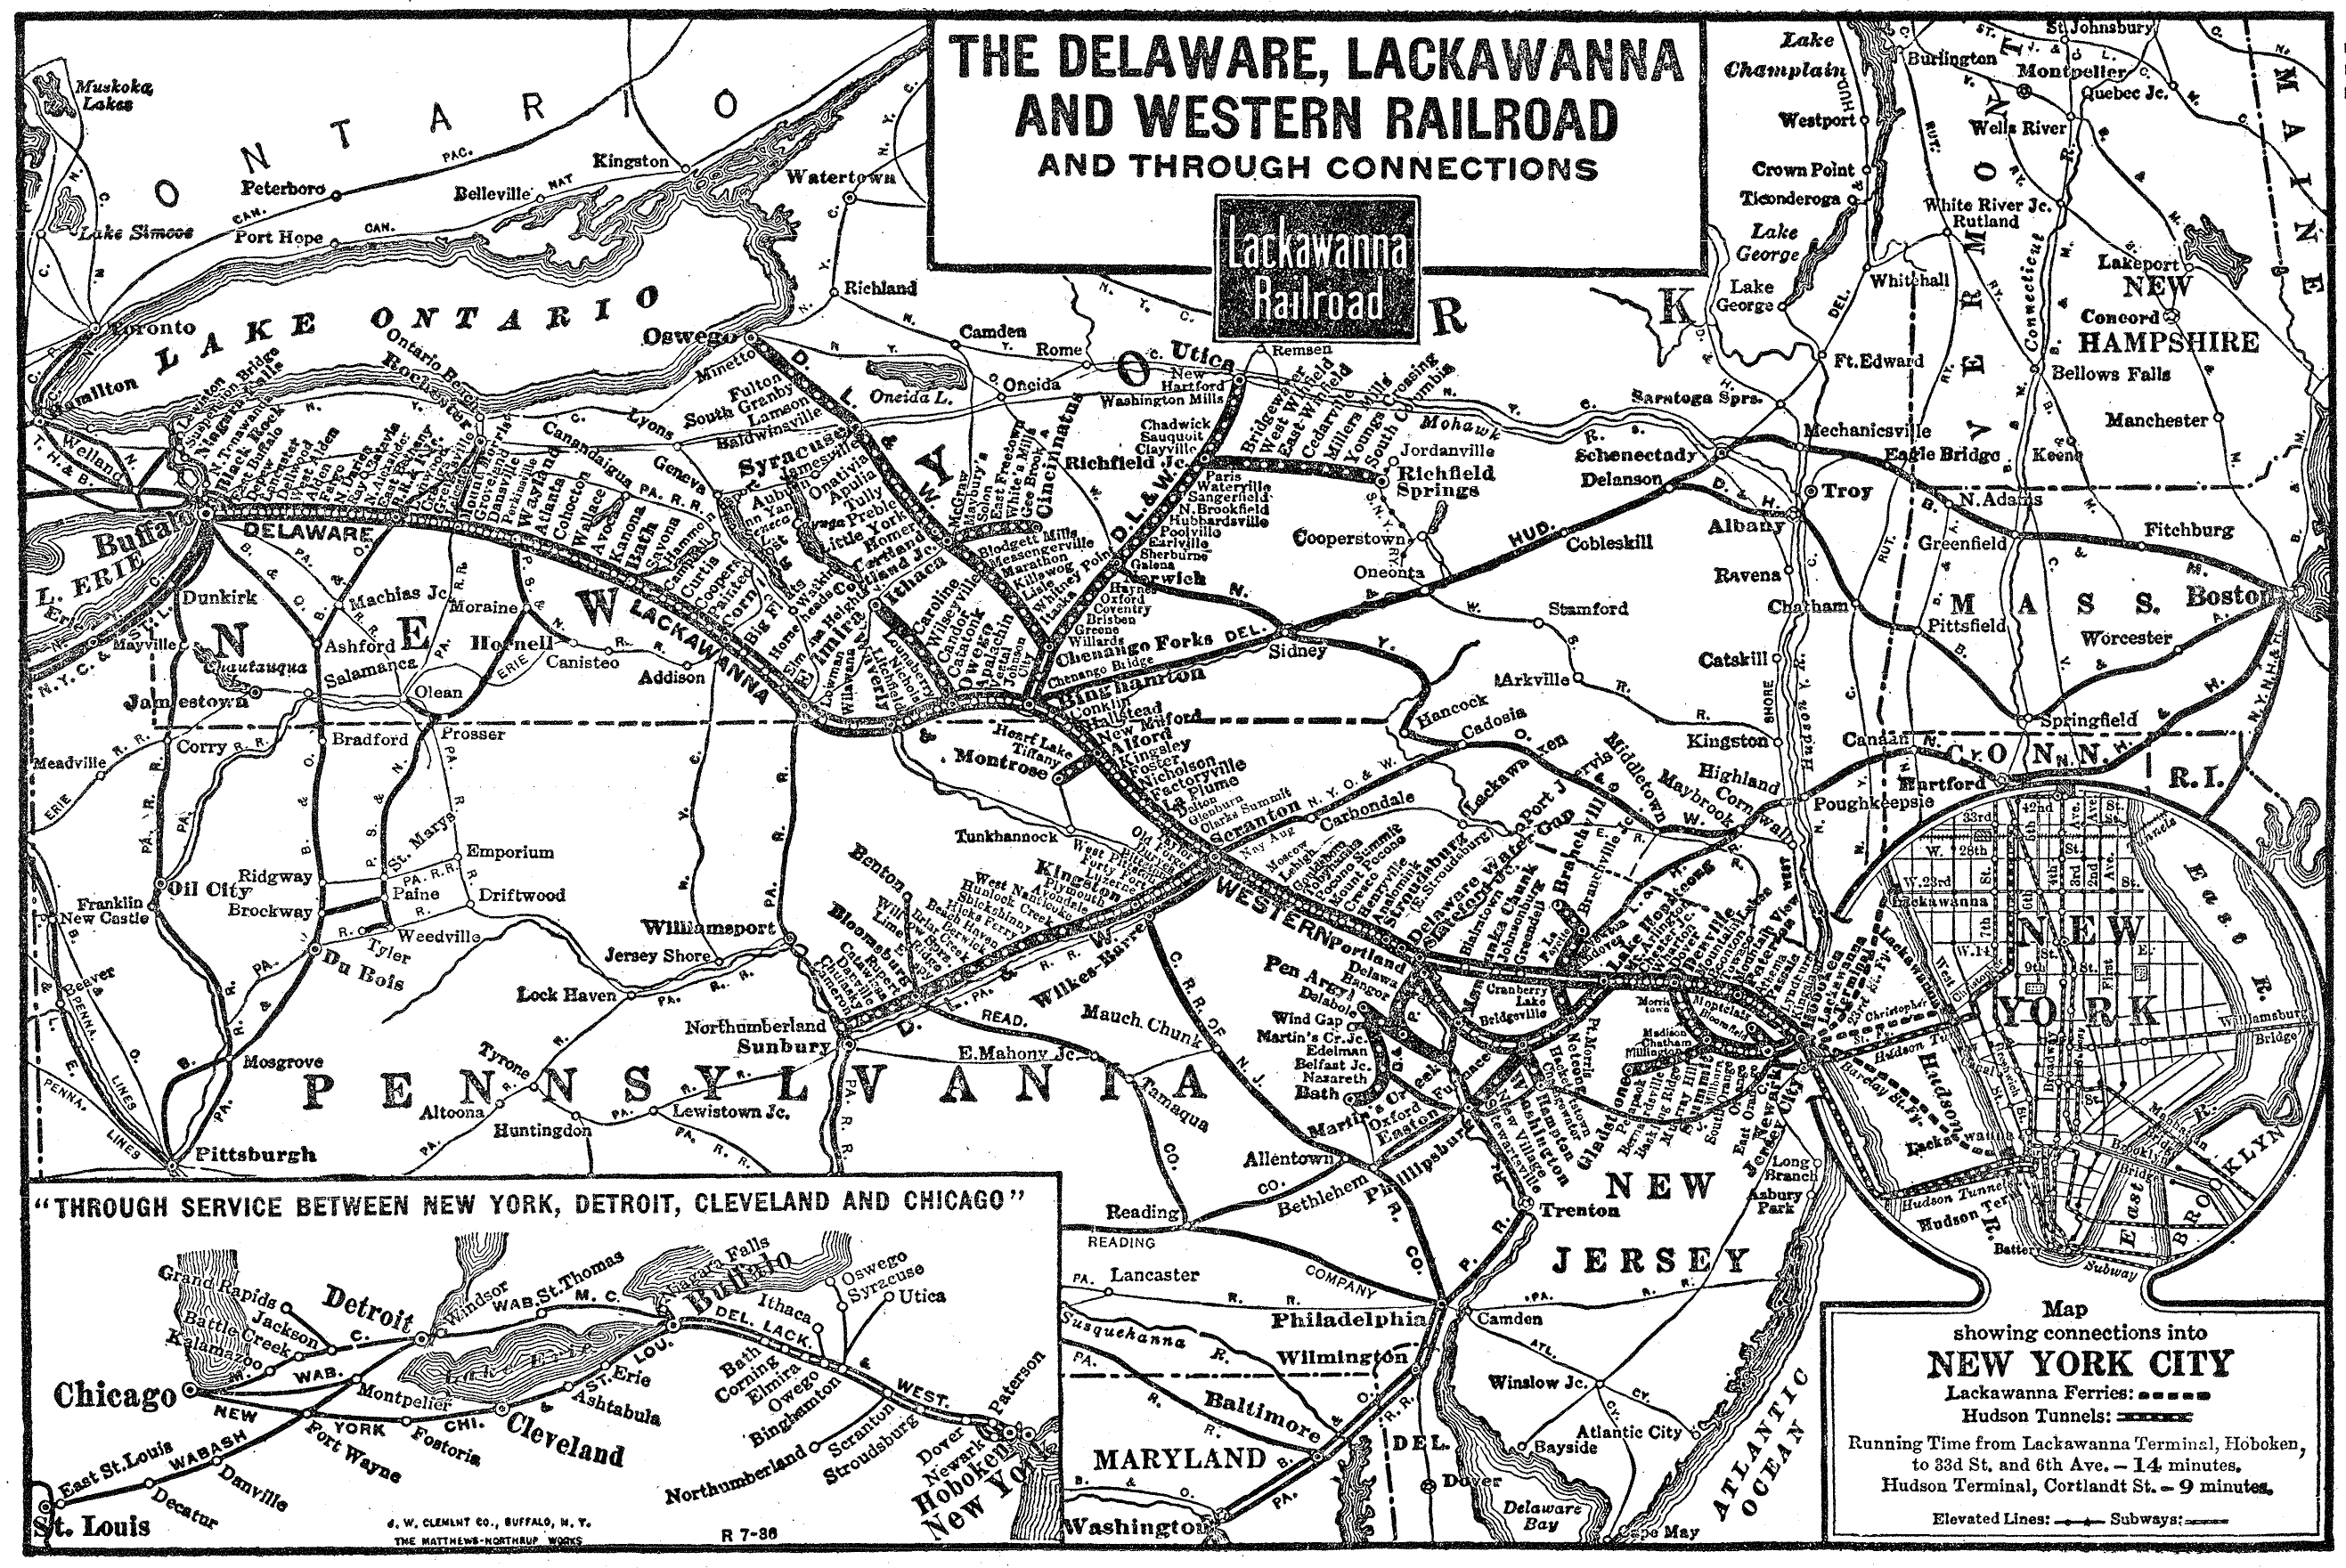 ERIE-LACKAWANNA RR 1960-16" X 20" SYSTEM MAP-COMPLETE DETAILED HISTORICAL